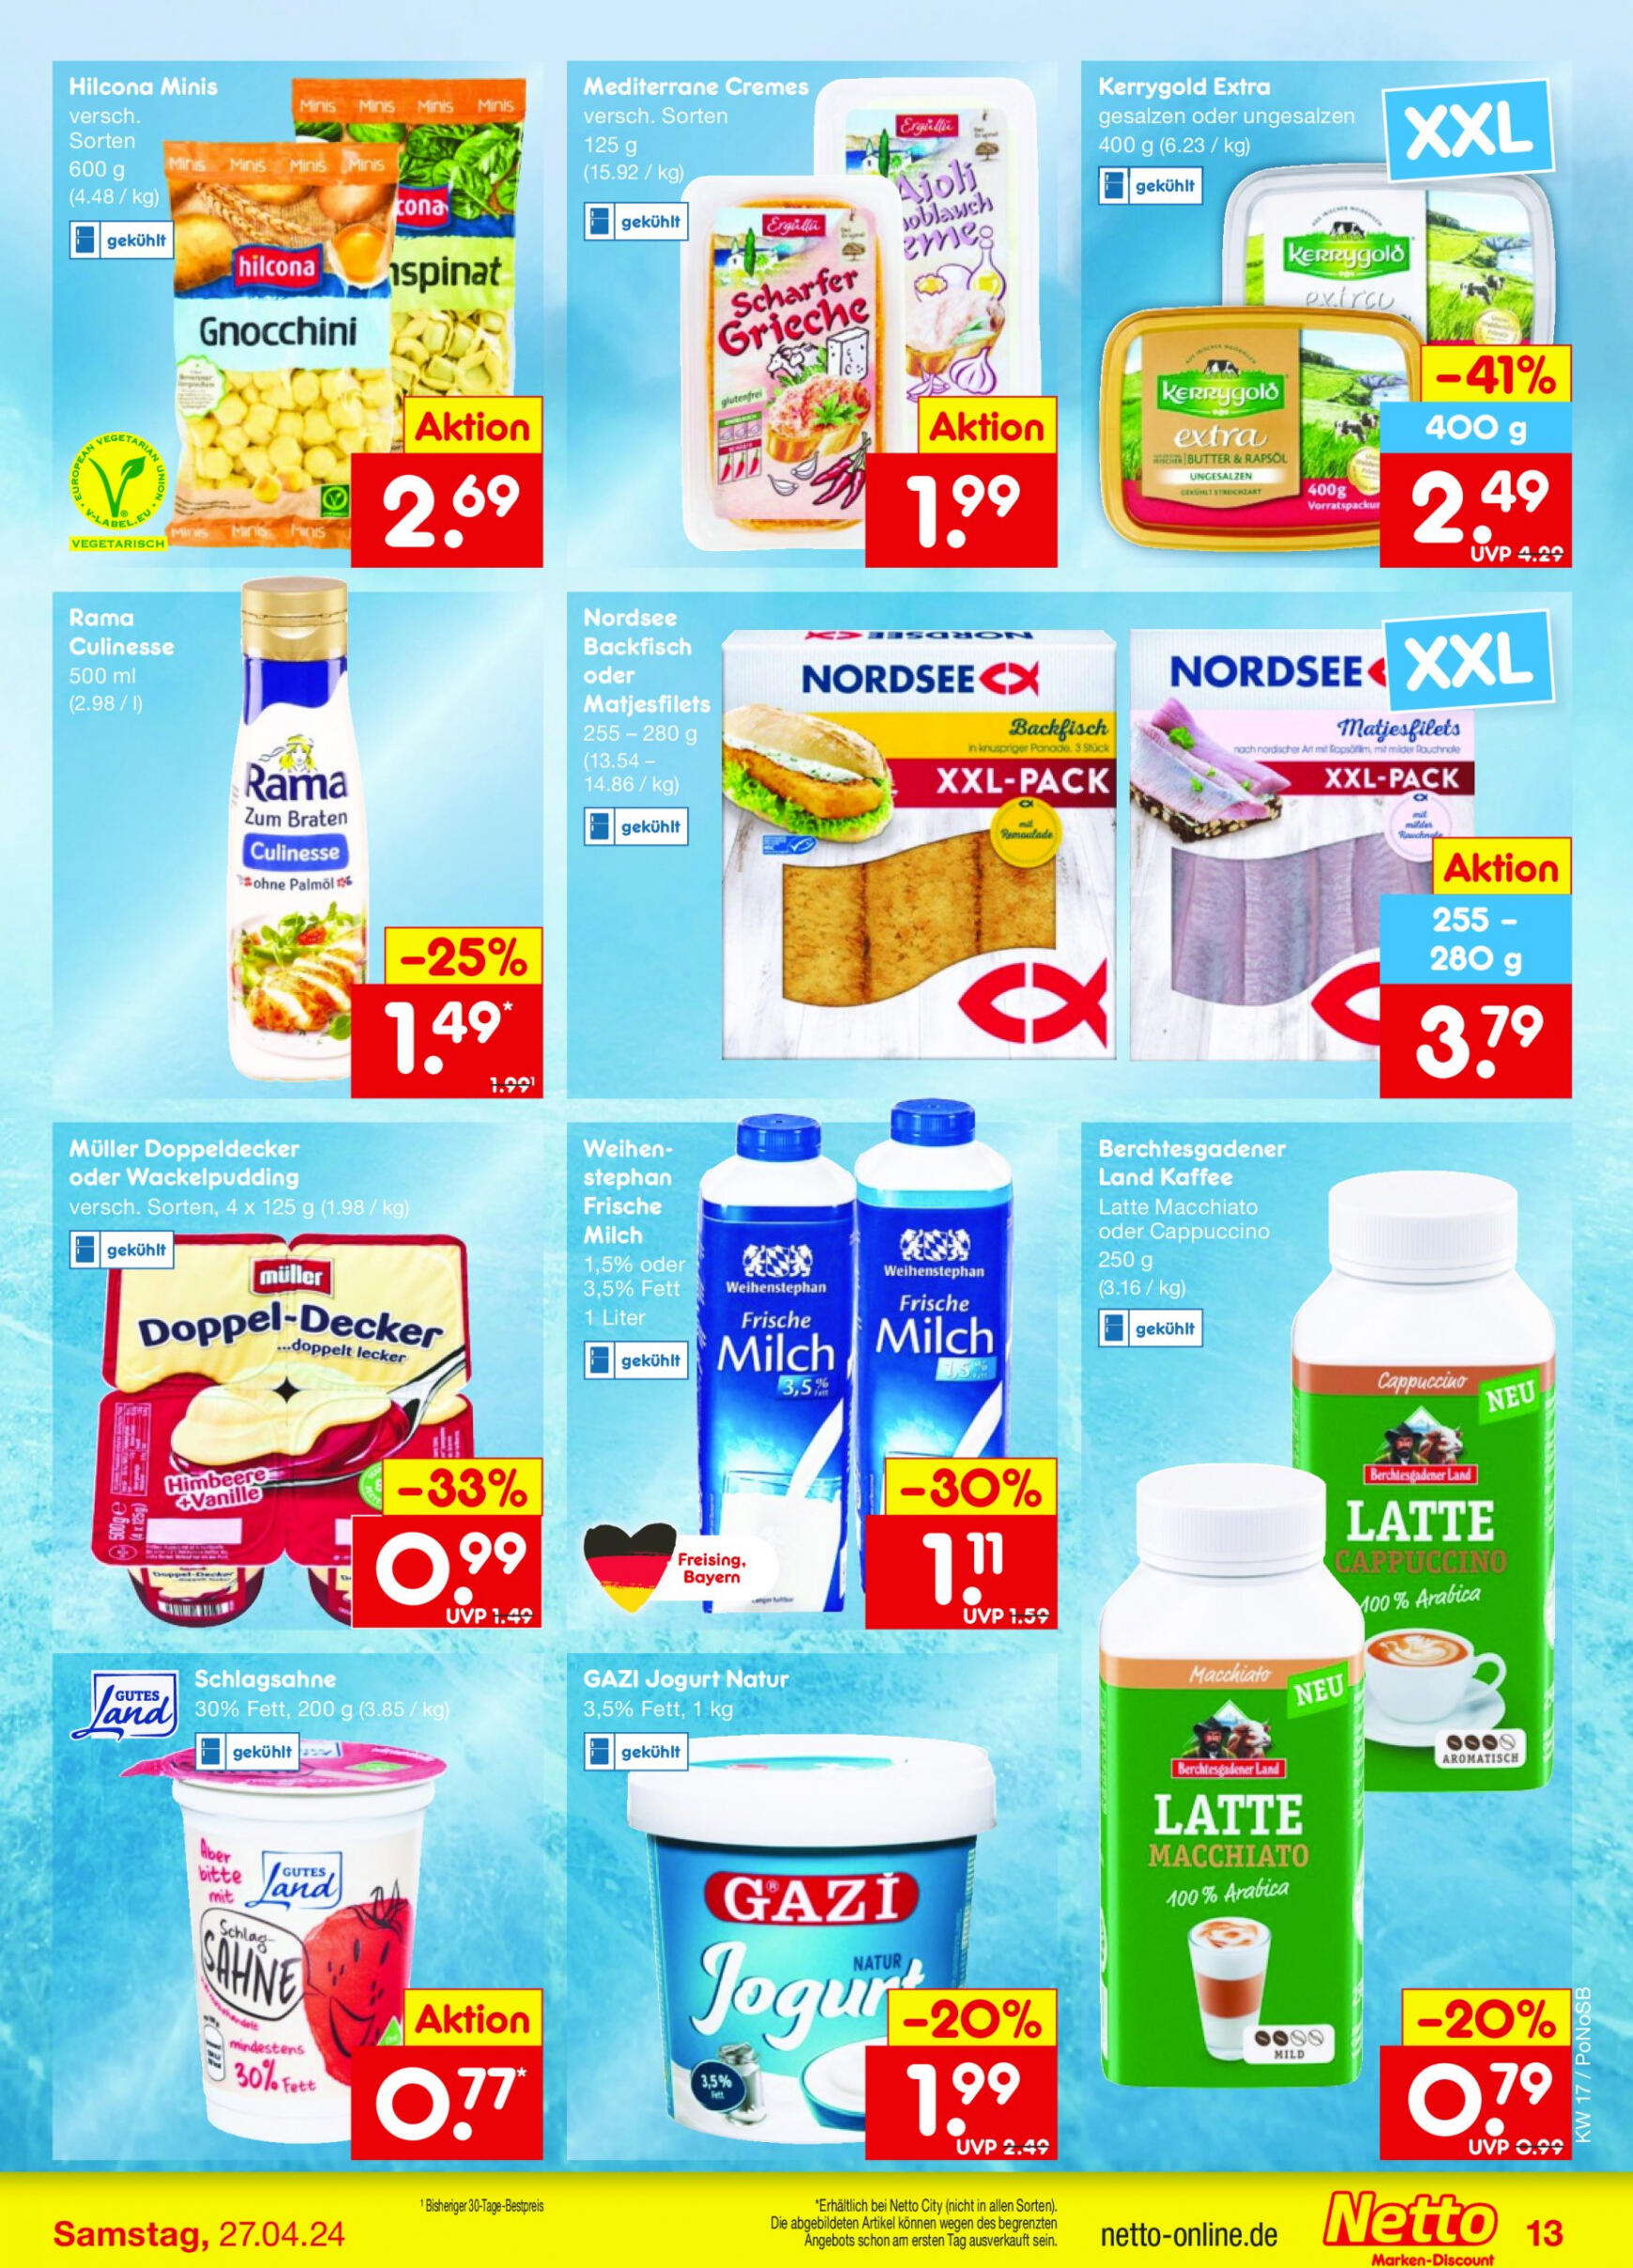 netto - Flyer Netto aktuell 22.04. - 27.04. - page: 13